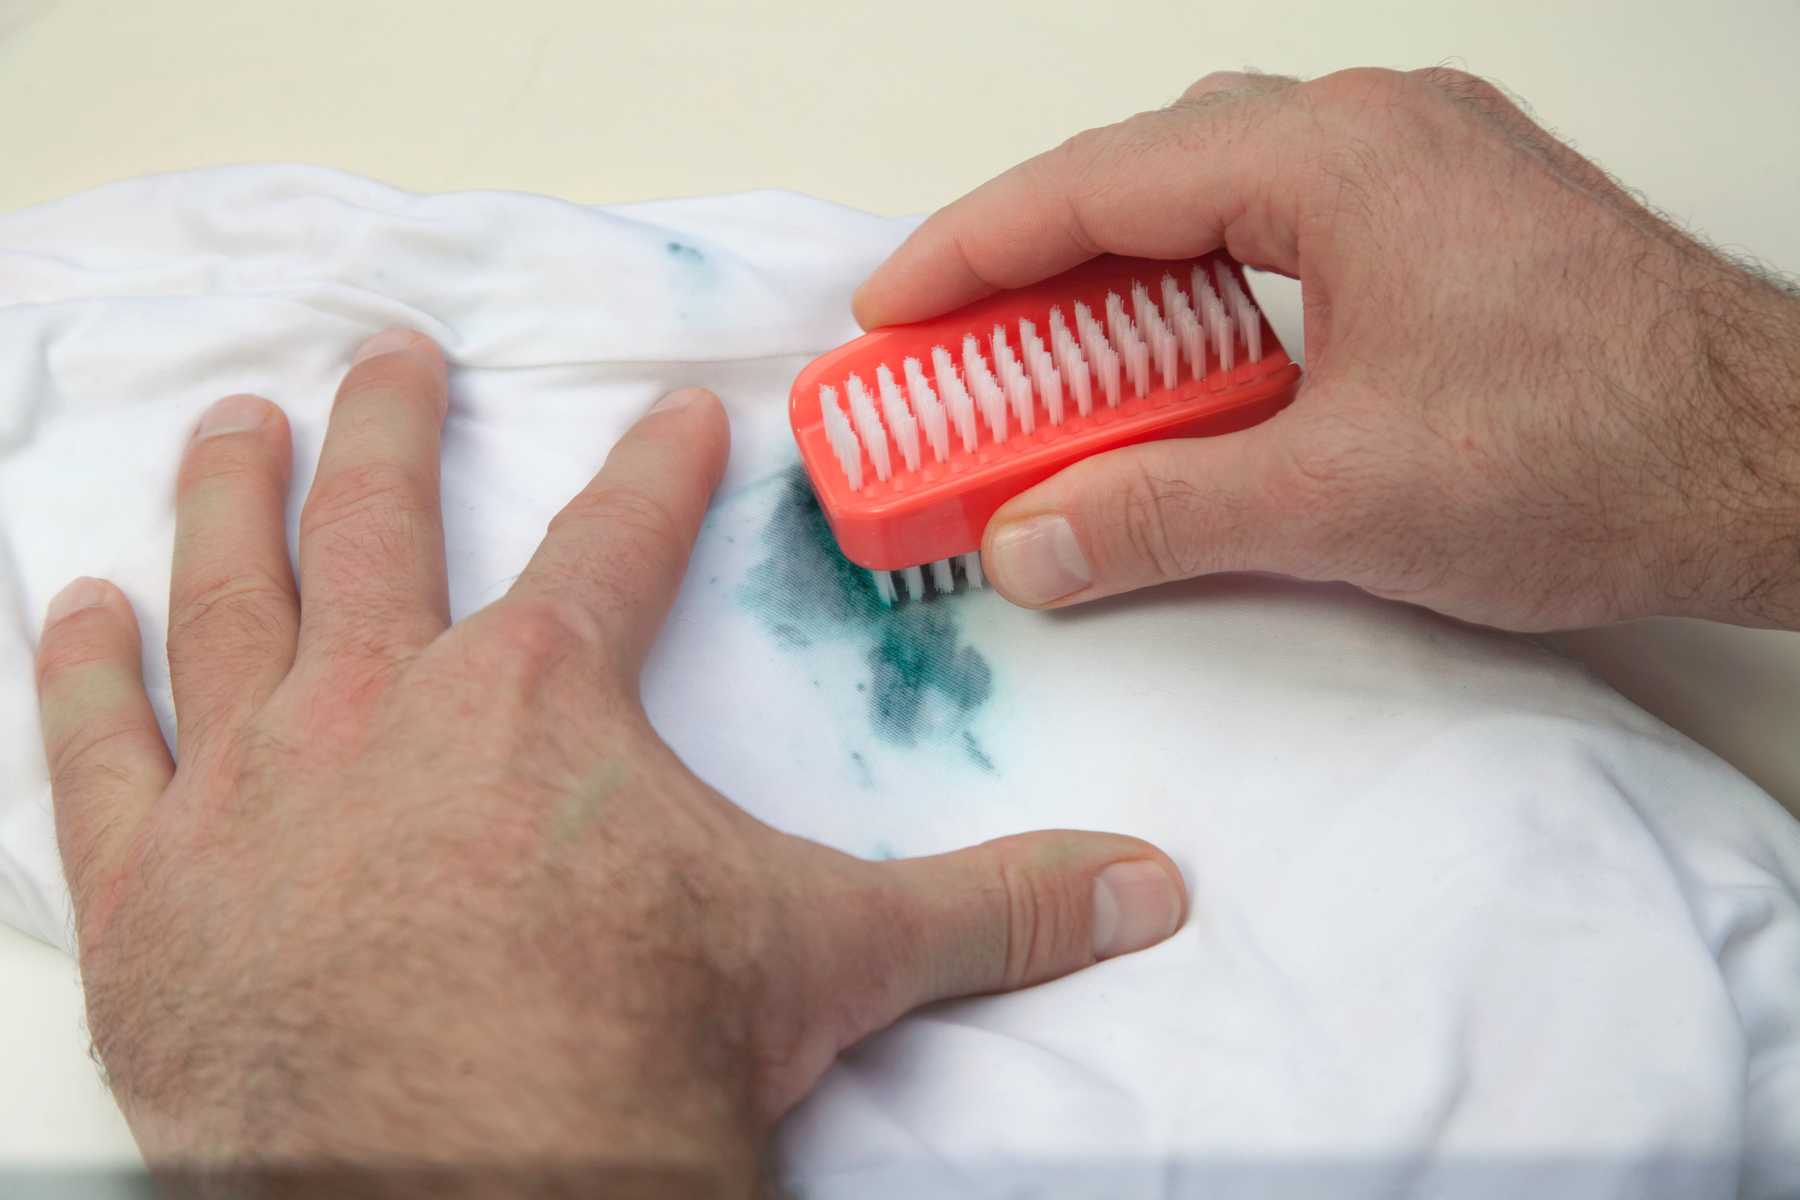 Removing paint from your clothes